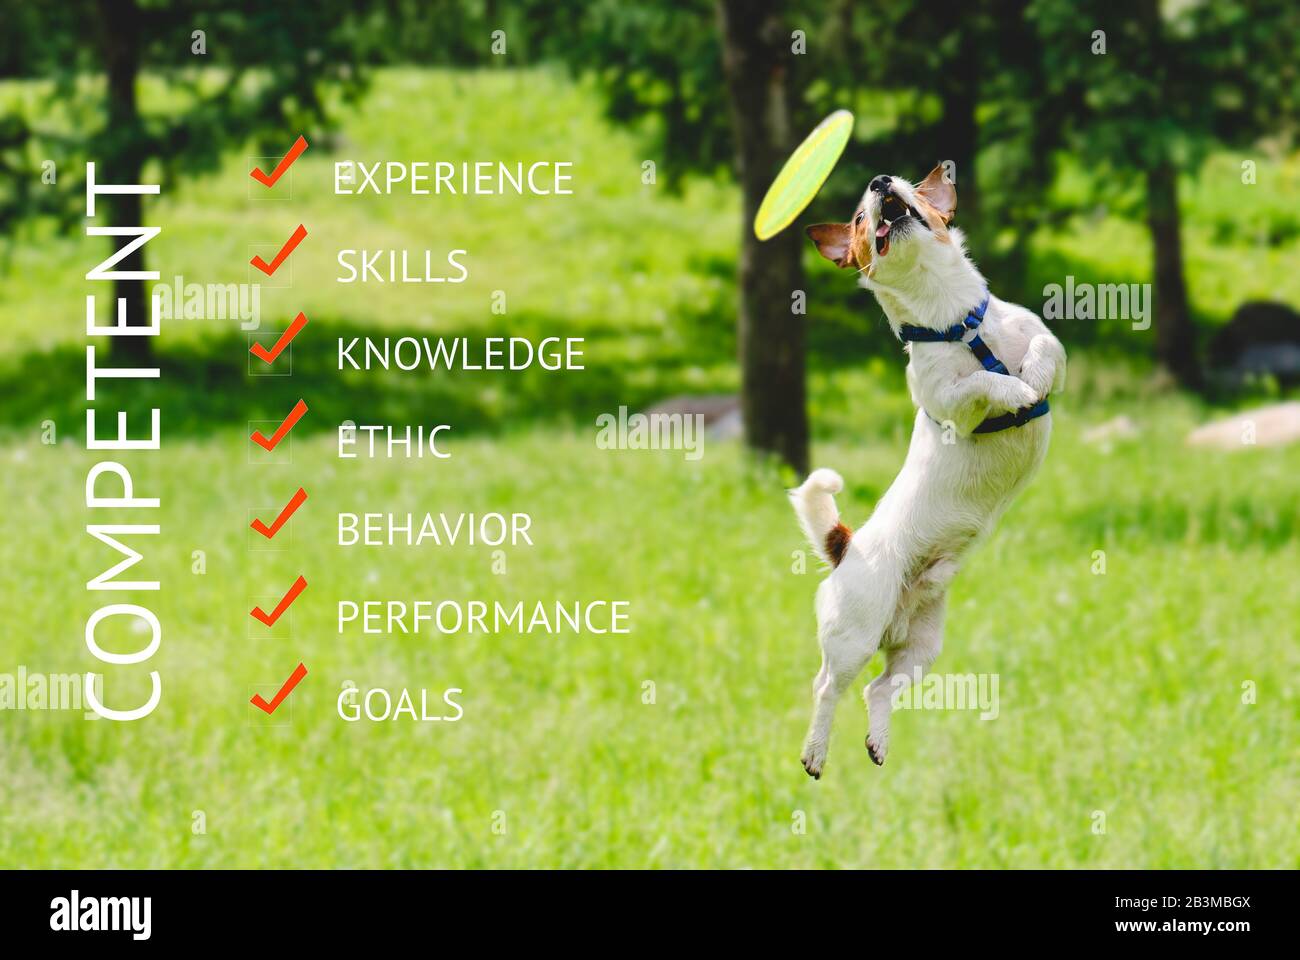 Humorous business concept about competence with dog catching flying disk in agile jump Stock Photo